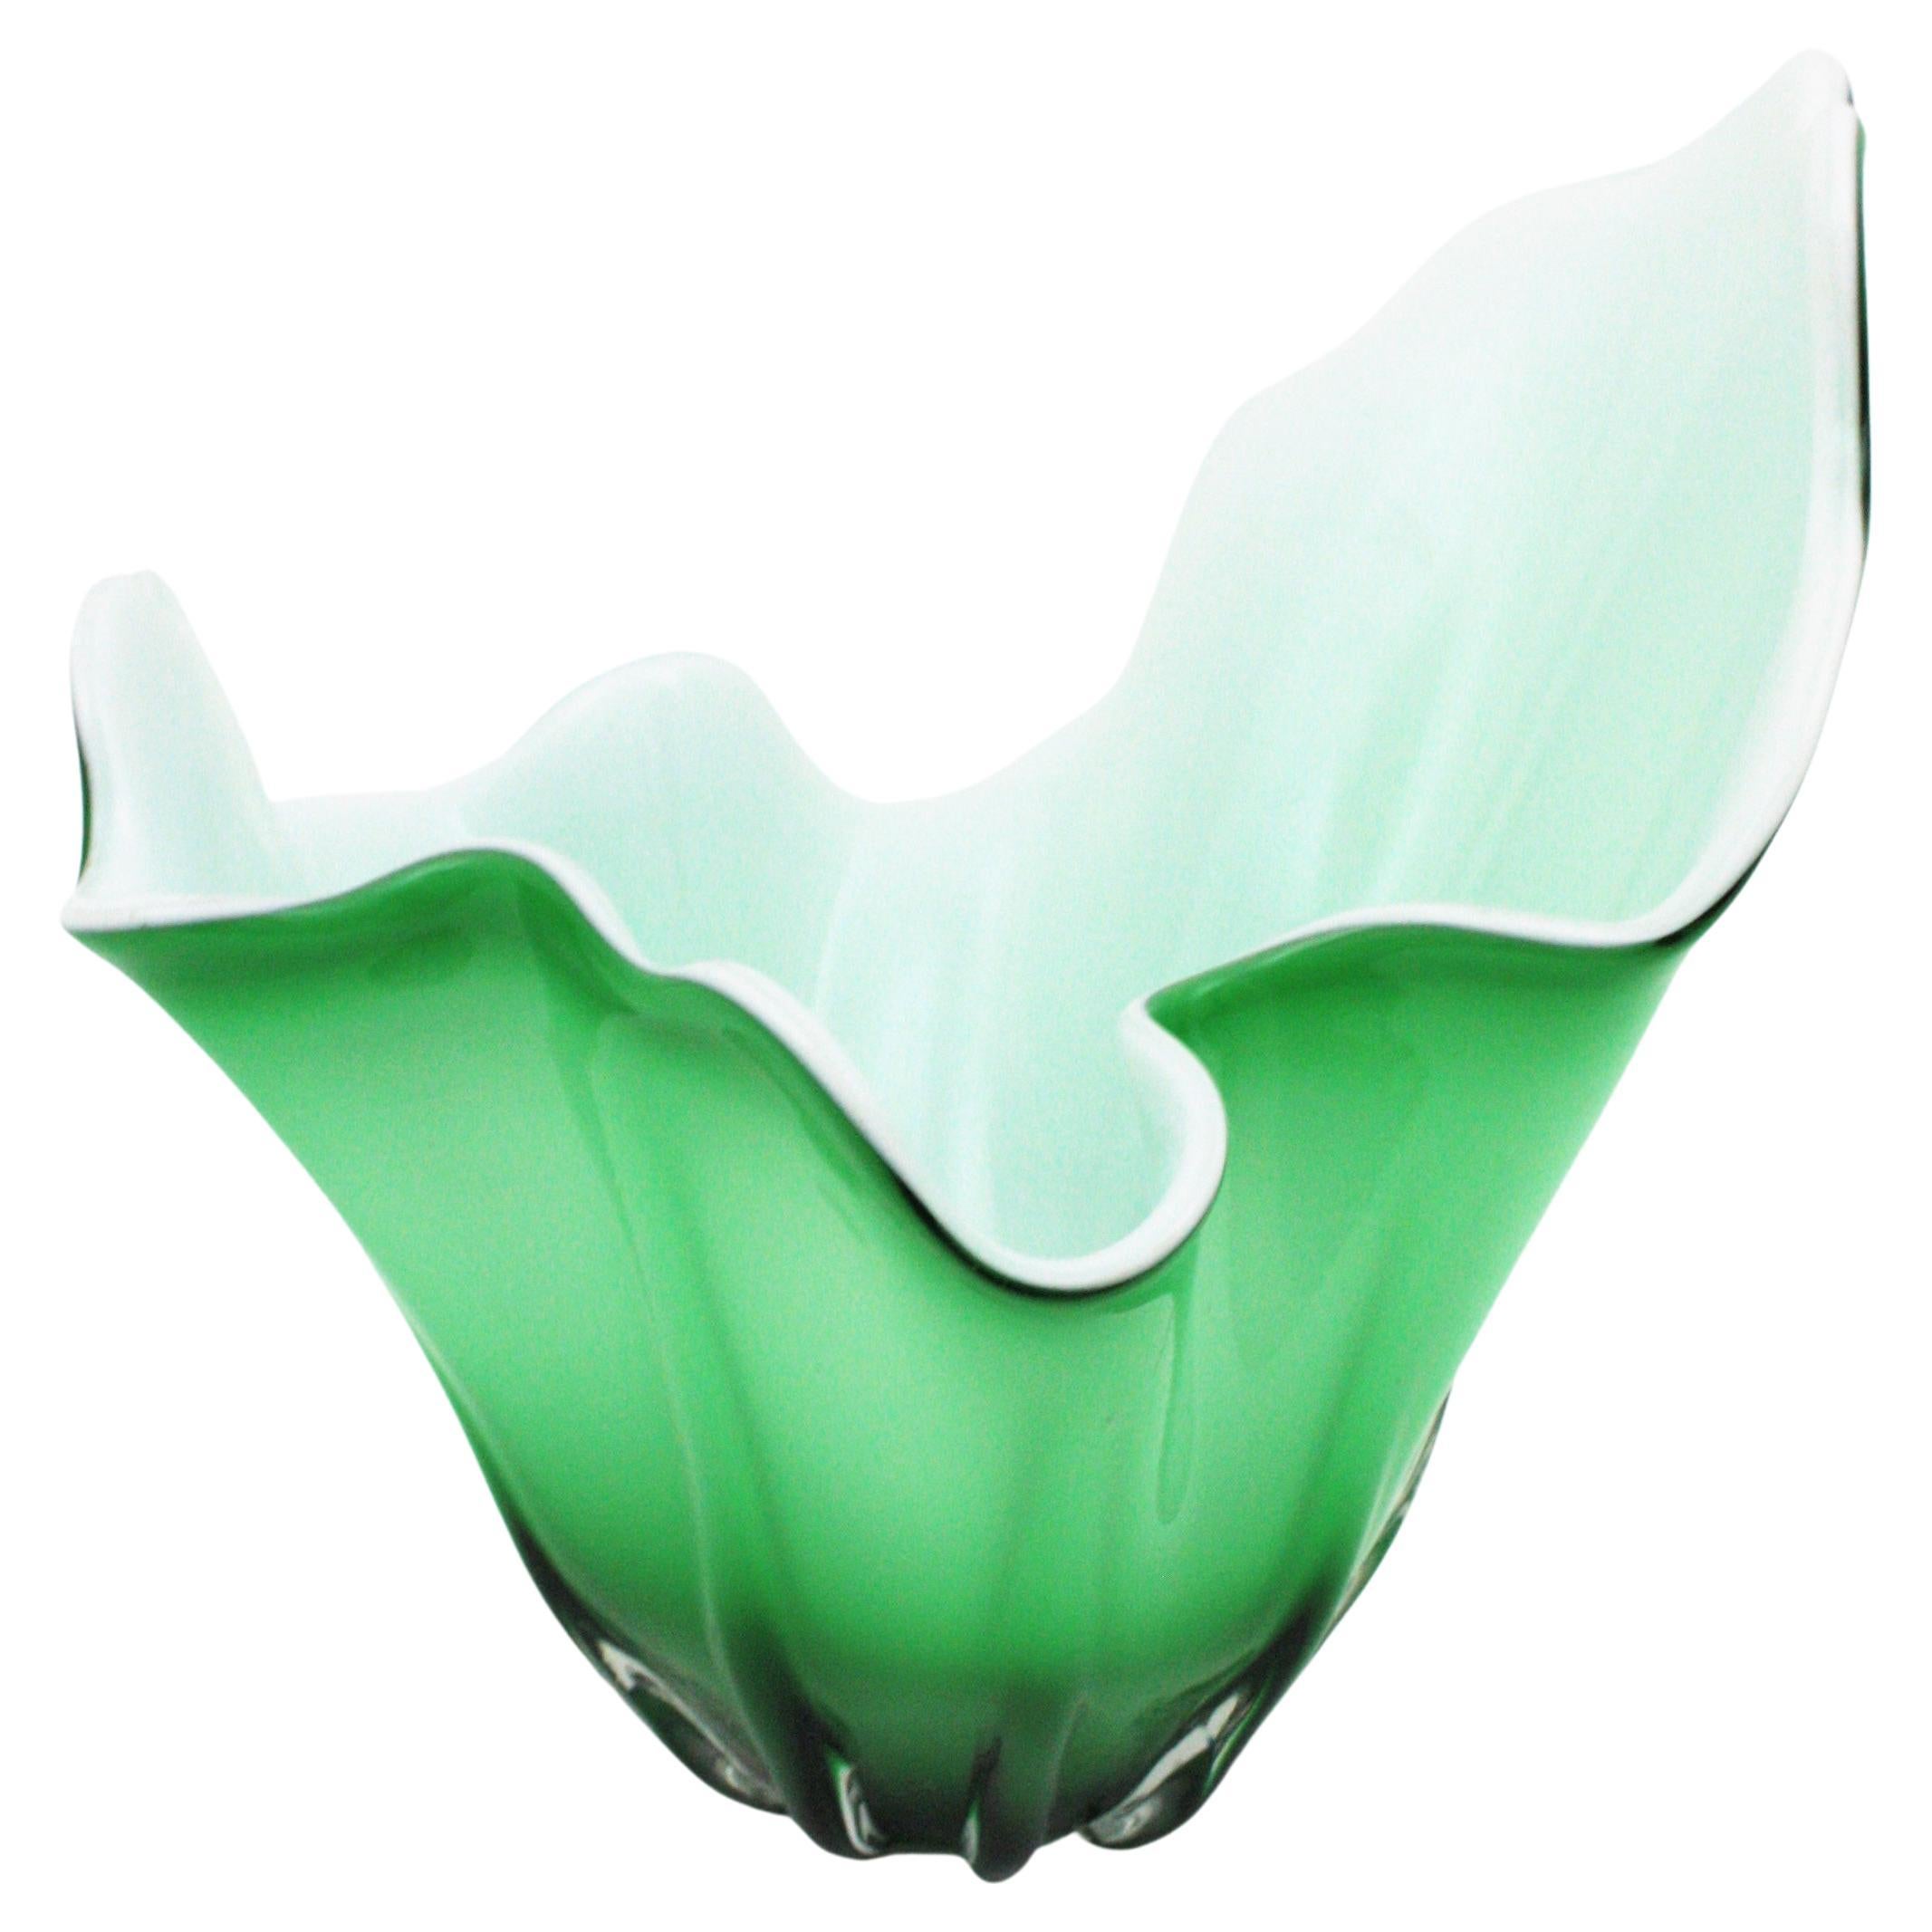 Eye-catching Sommerso Murano Glass Large Centerpiece Vase. Italy, 1960s.
This hand blown Murano glass vase is made with green glass submerged into clear glass at the exterior part and it has white glass at the interior part. Amazing fazzoletto